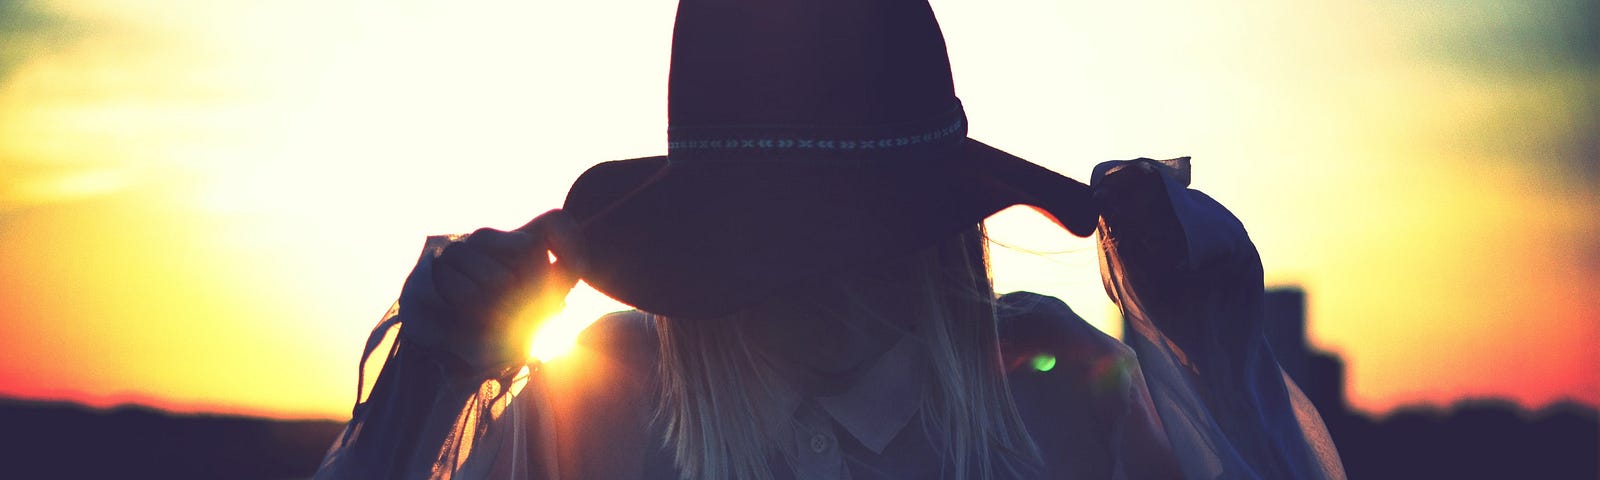 Woman with hat covering her face in front of sunset